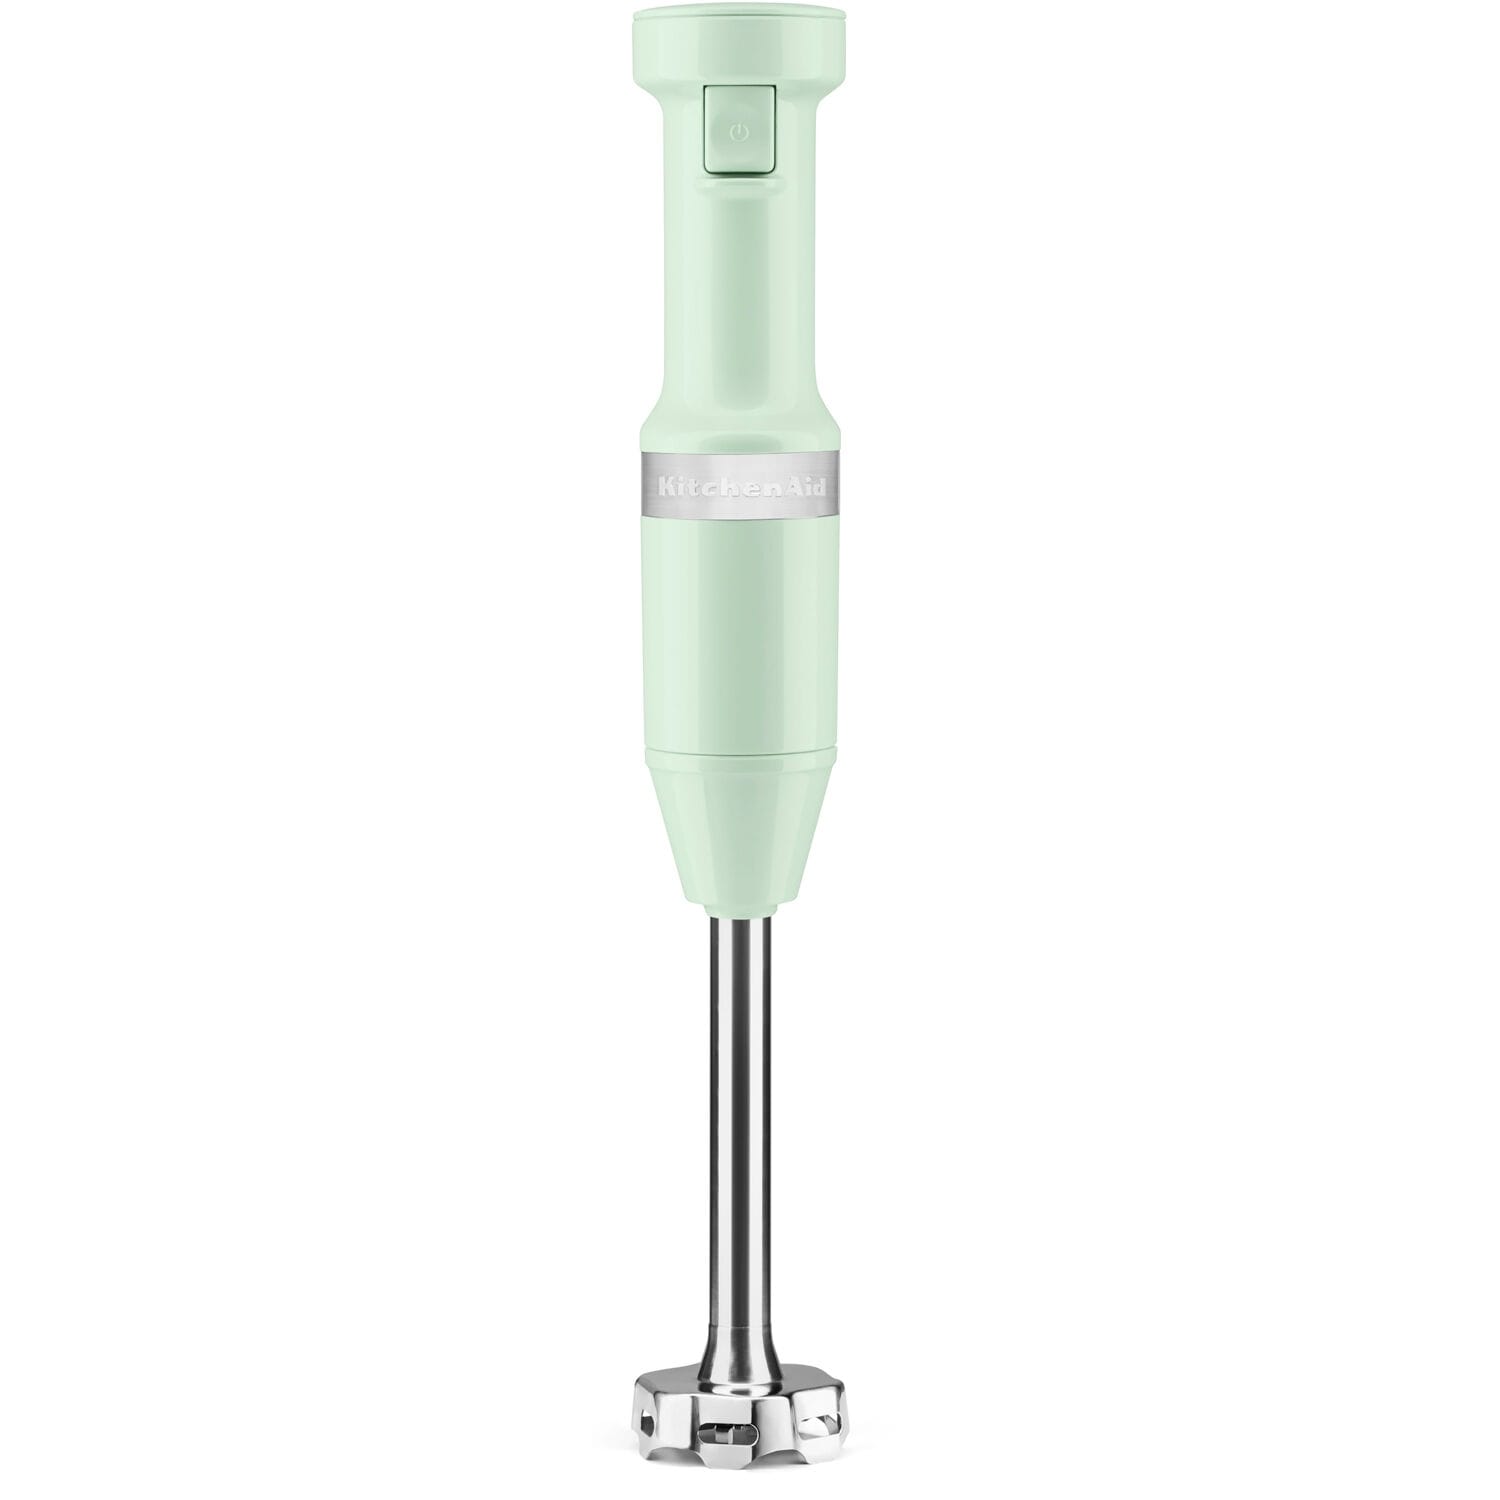 KitchenAid Corded Variable-Speed Immersion Blender in Pistachio